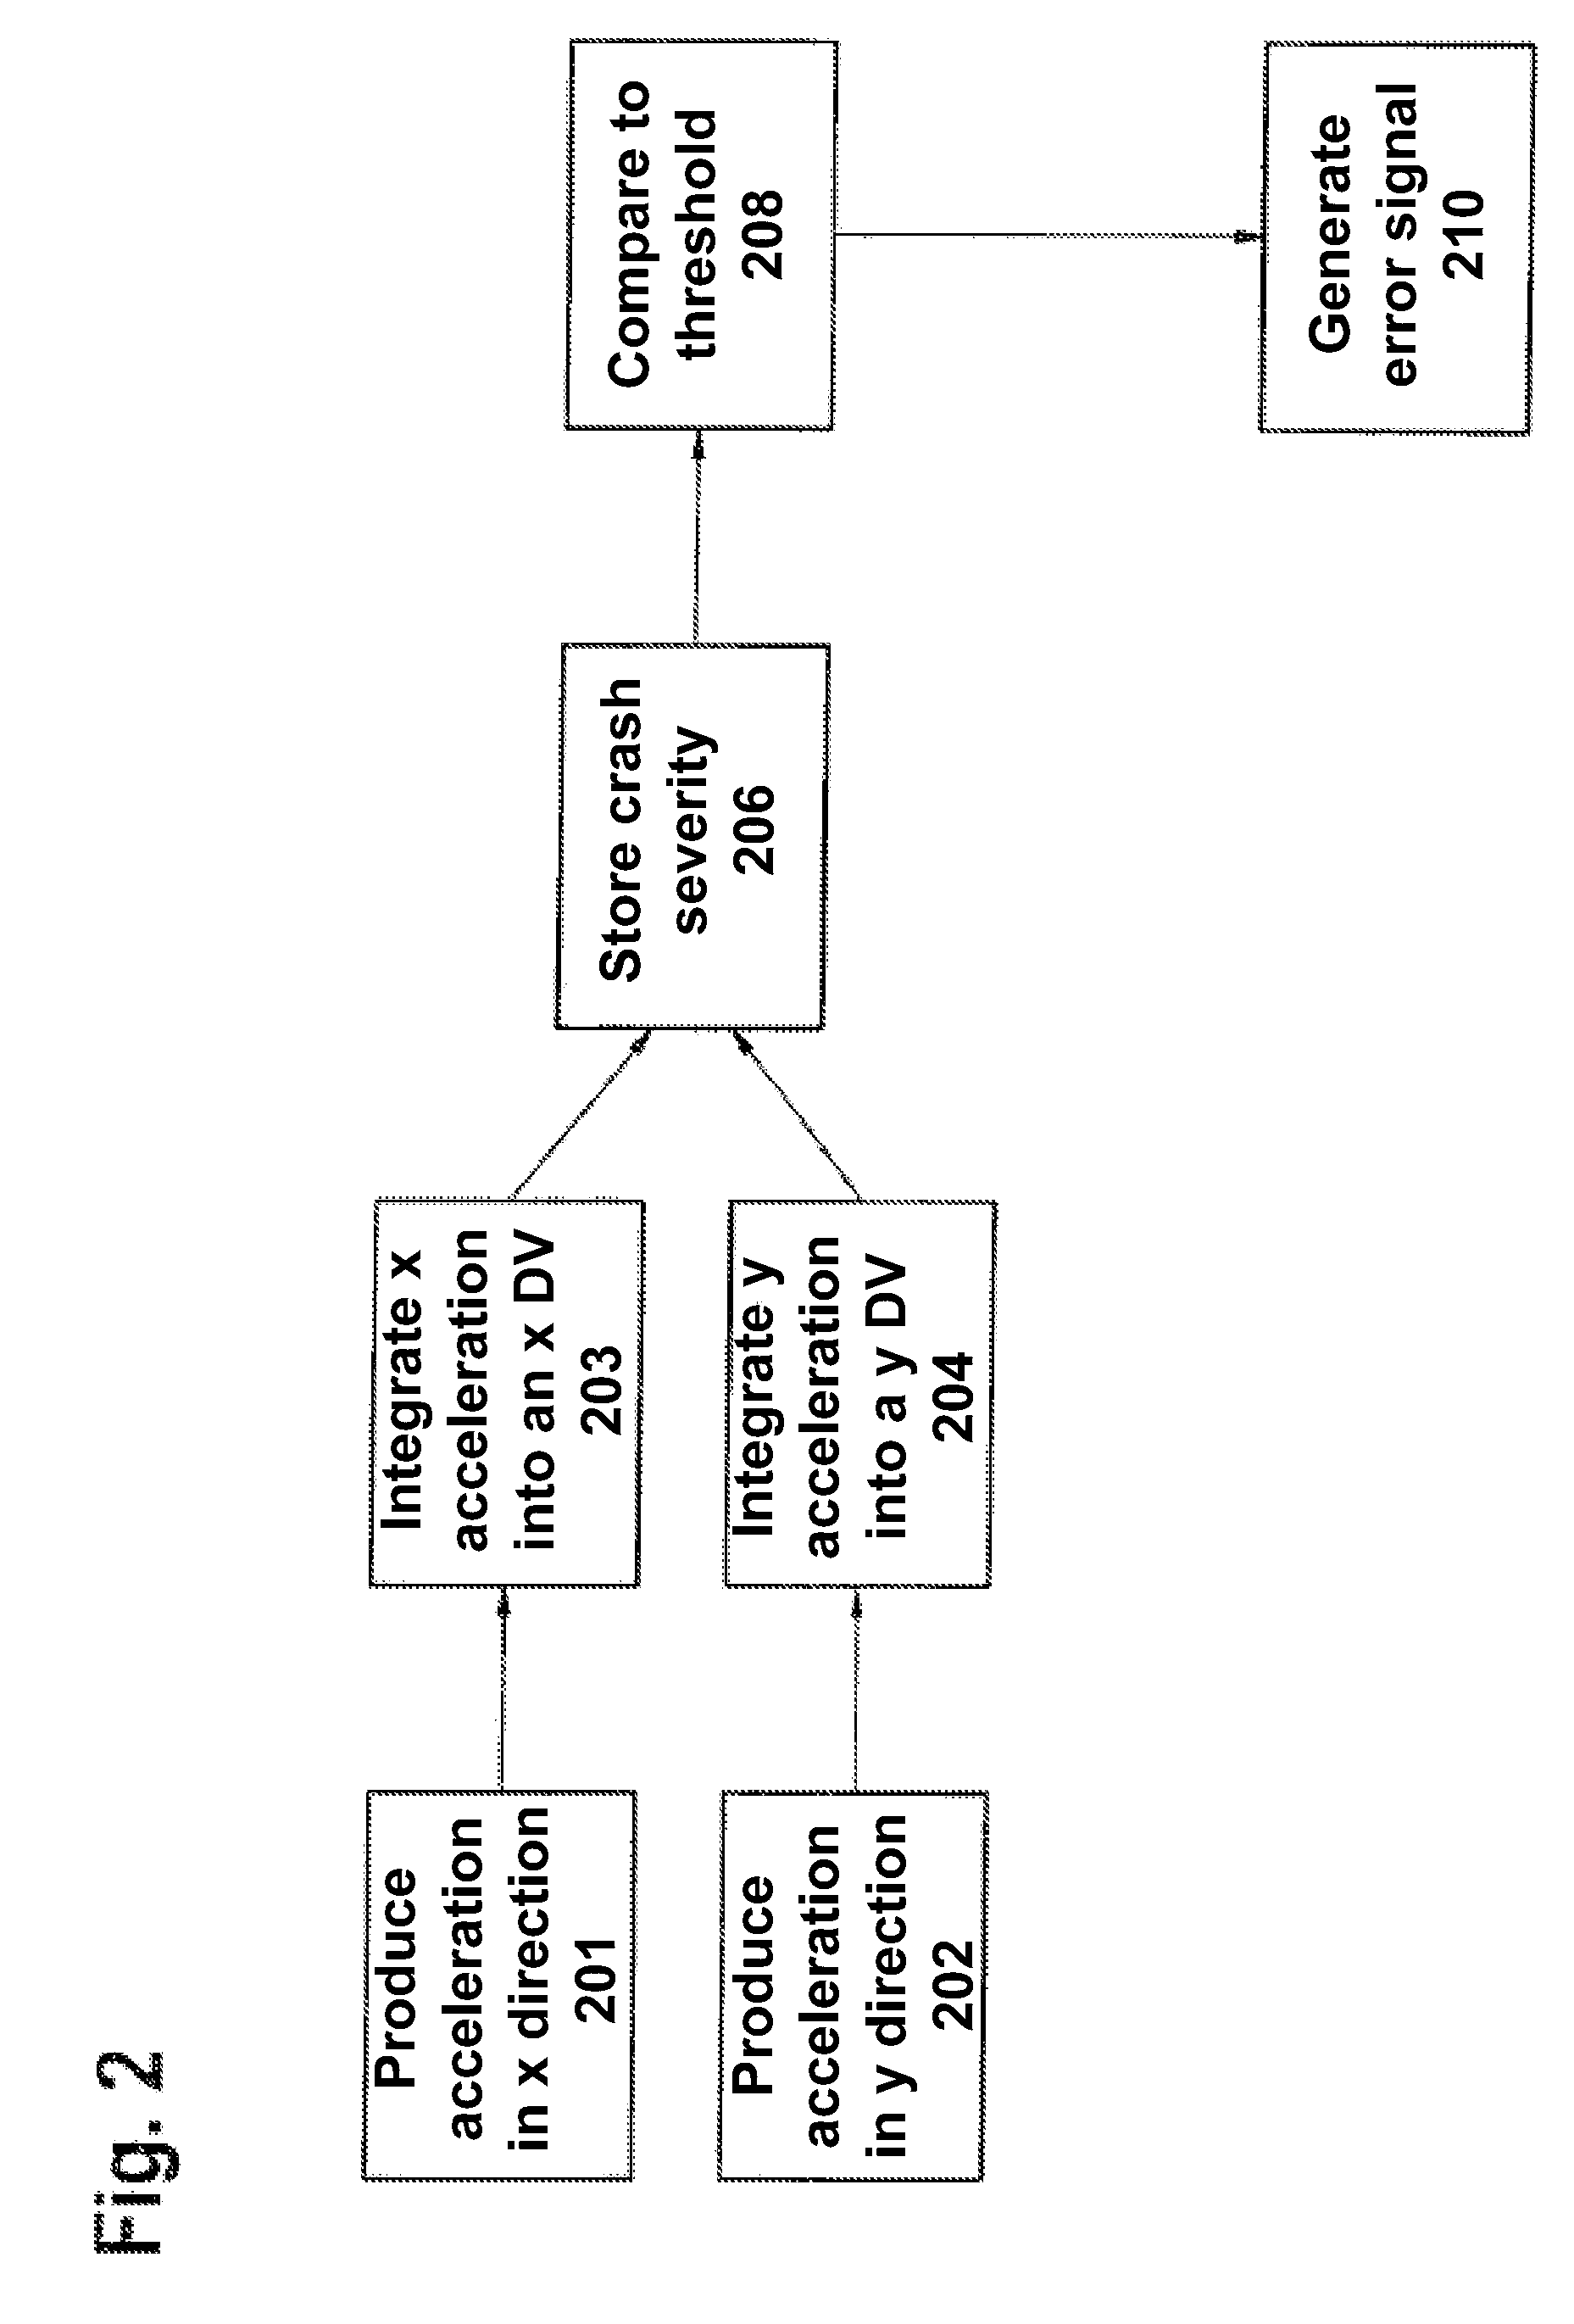 Method for monitoring the performance reliability of a control unit and diagnostic device